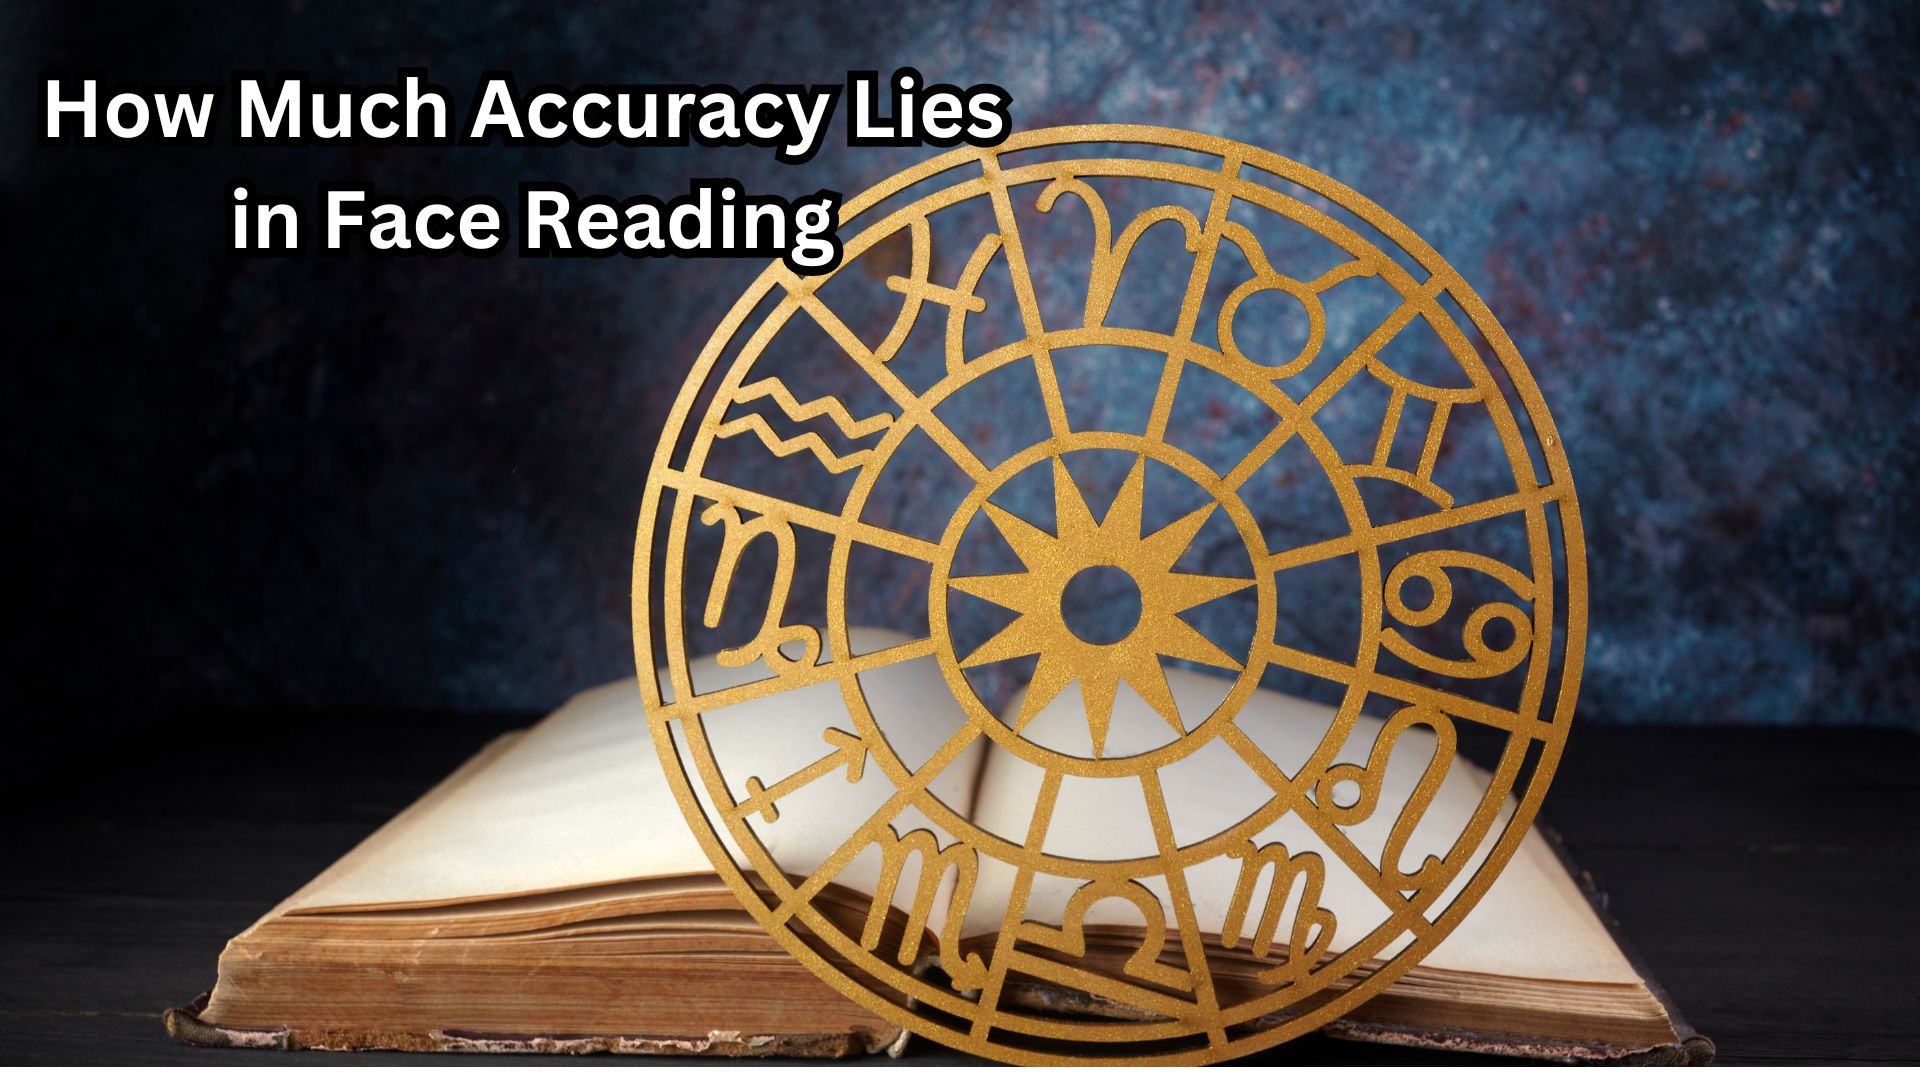 How Much Accuracy Lies in Face Reading